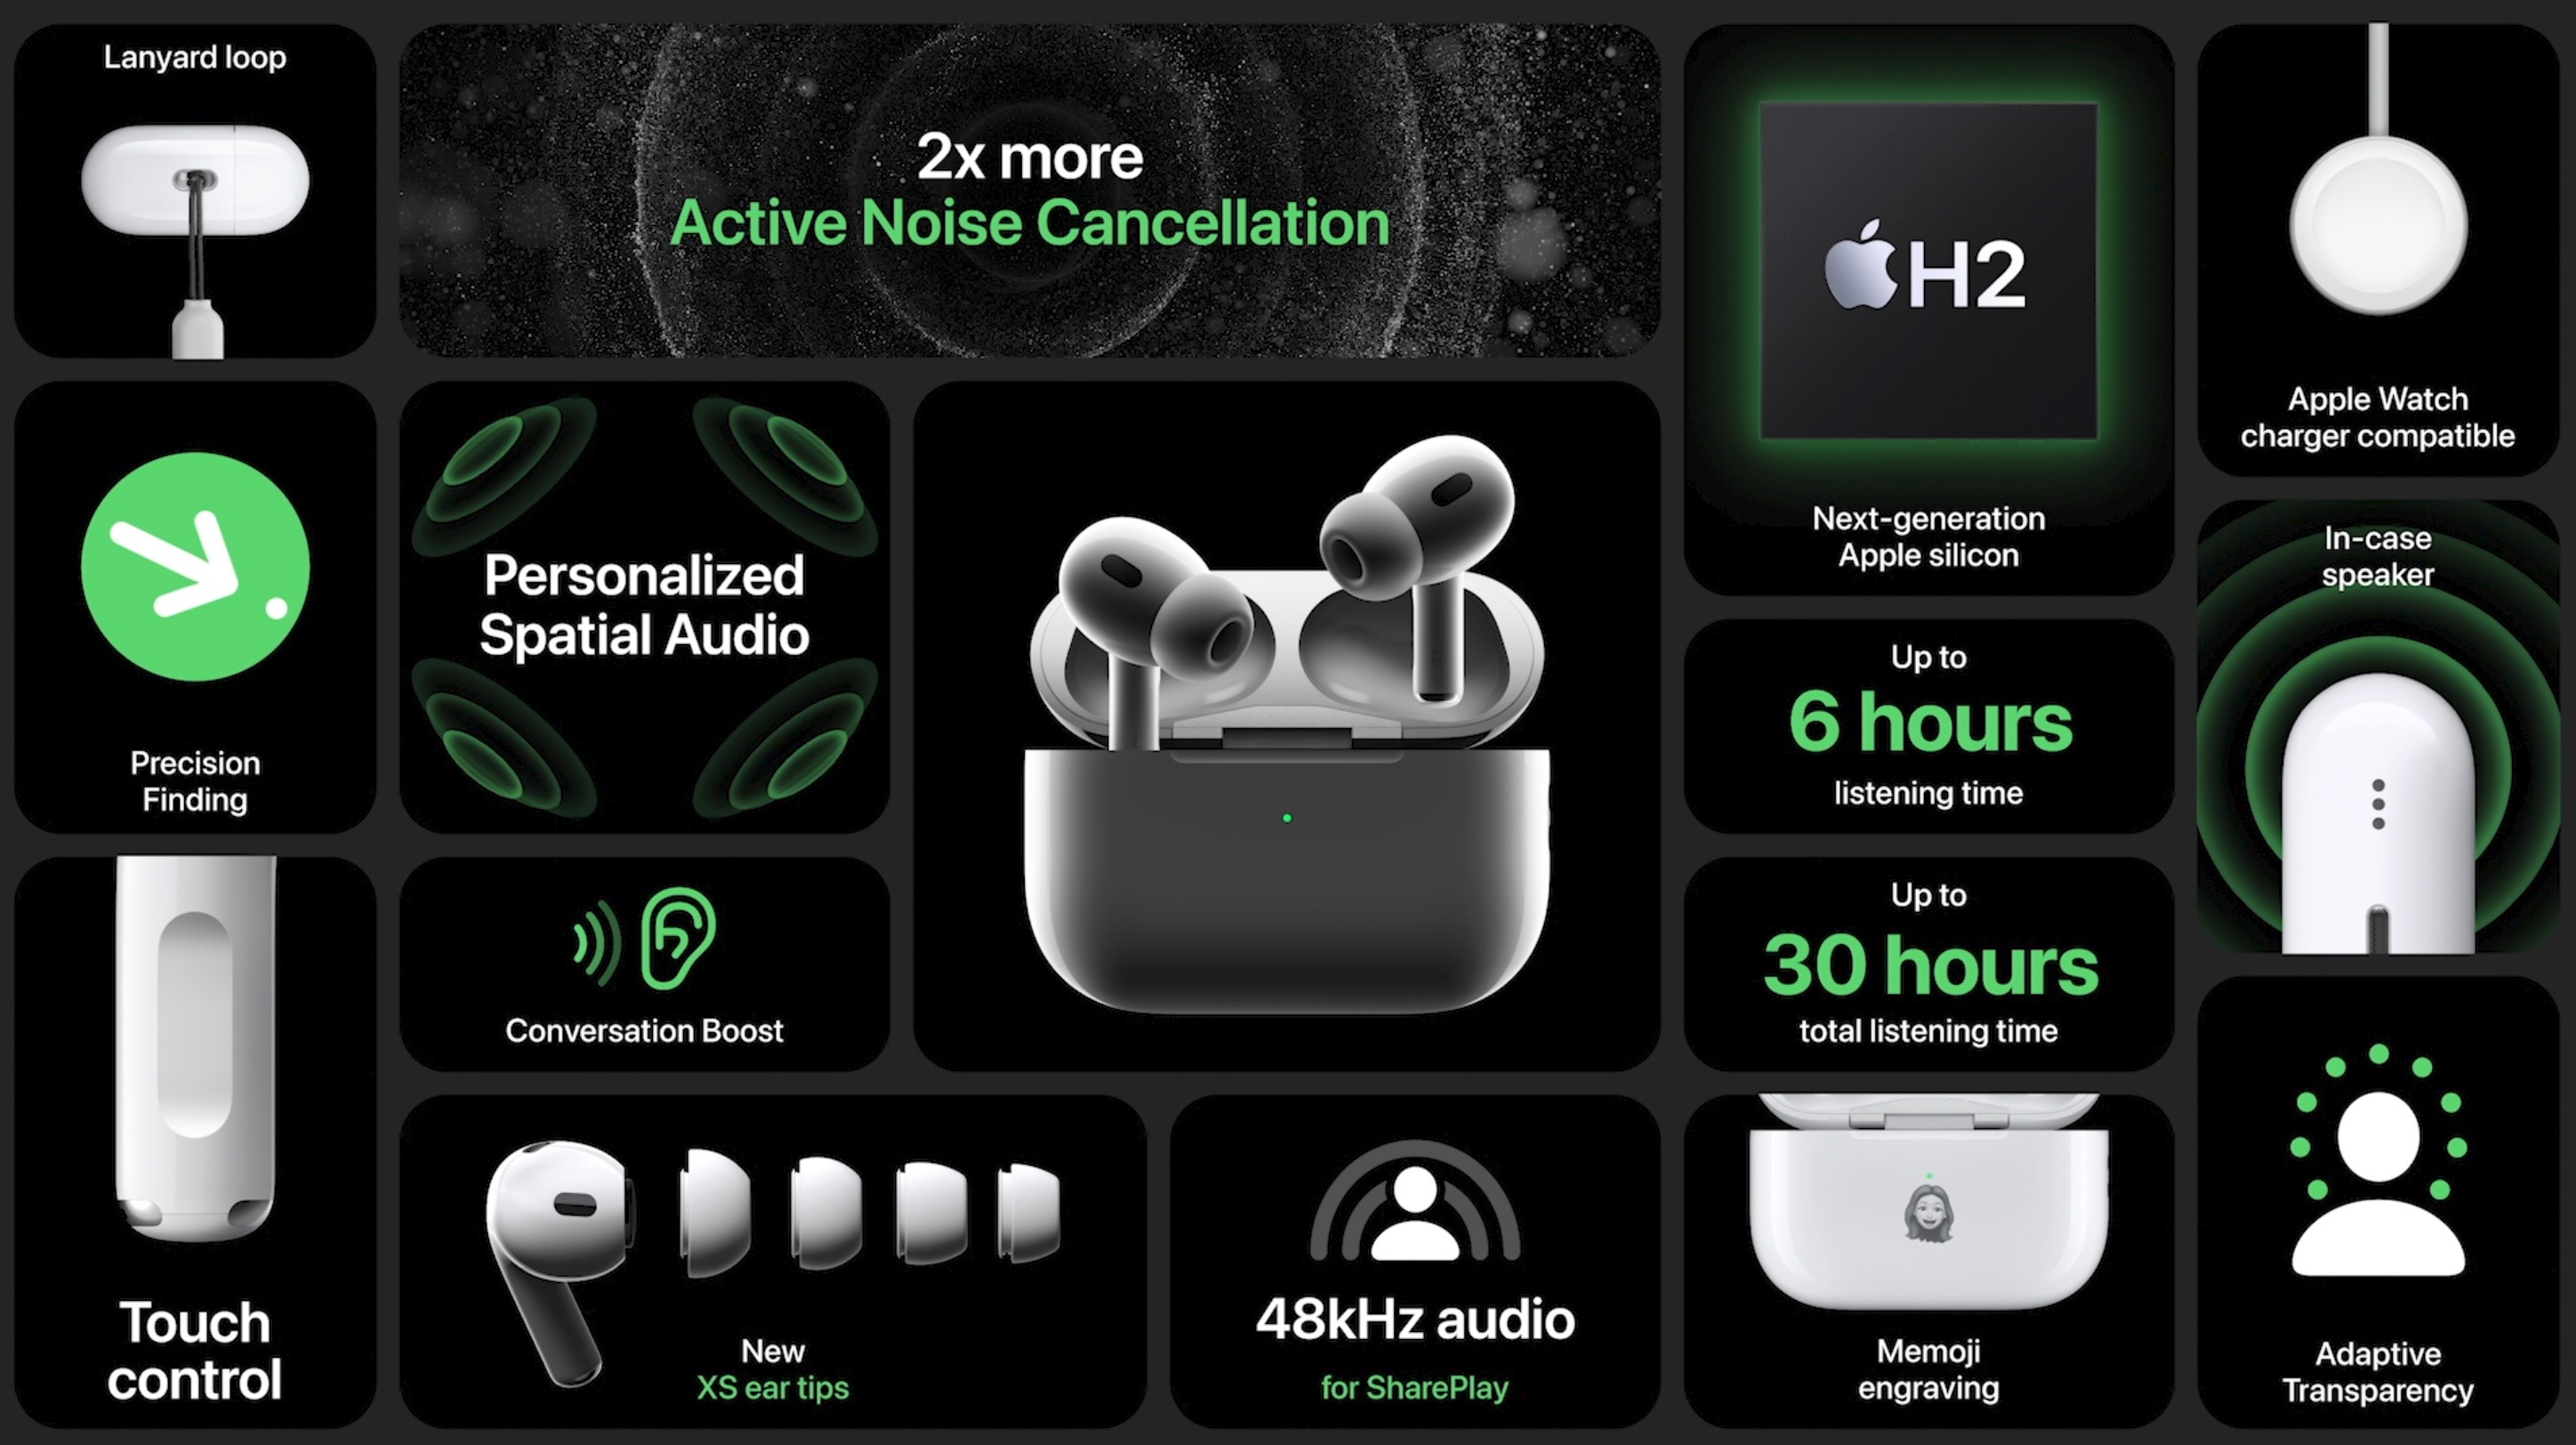 Infographic of the AirPods Pro 2 specs.